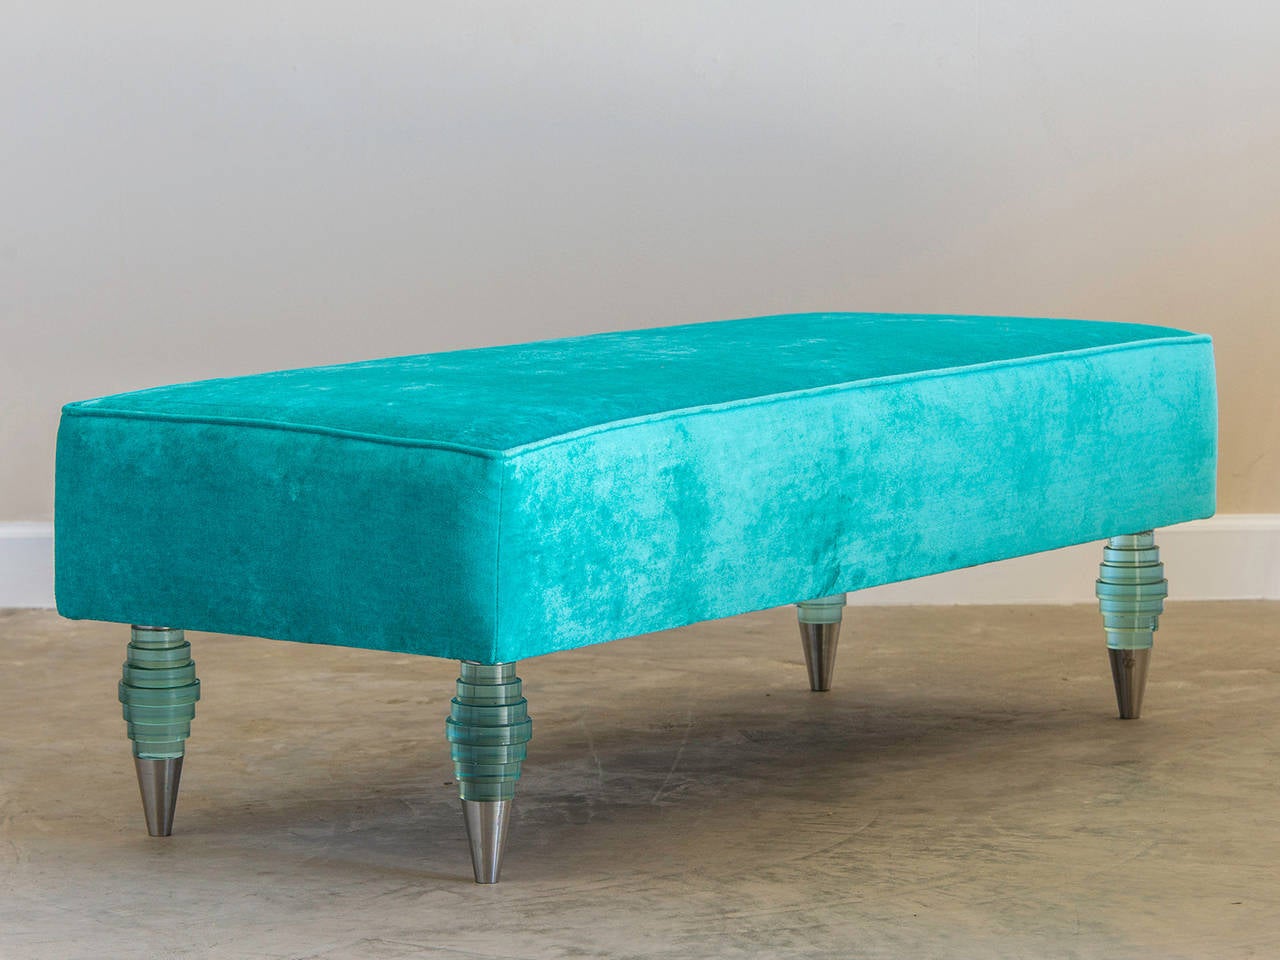 Glass Leg Bench, Italy c.1975. This unique bench features four legs made of stacked glass disks of varying diameters each retaining its original nickel mounts. The dramatic manner in which the glass legs capture and refract light because of the